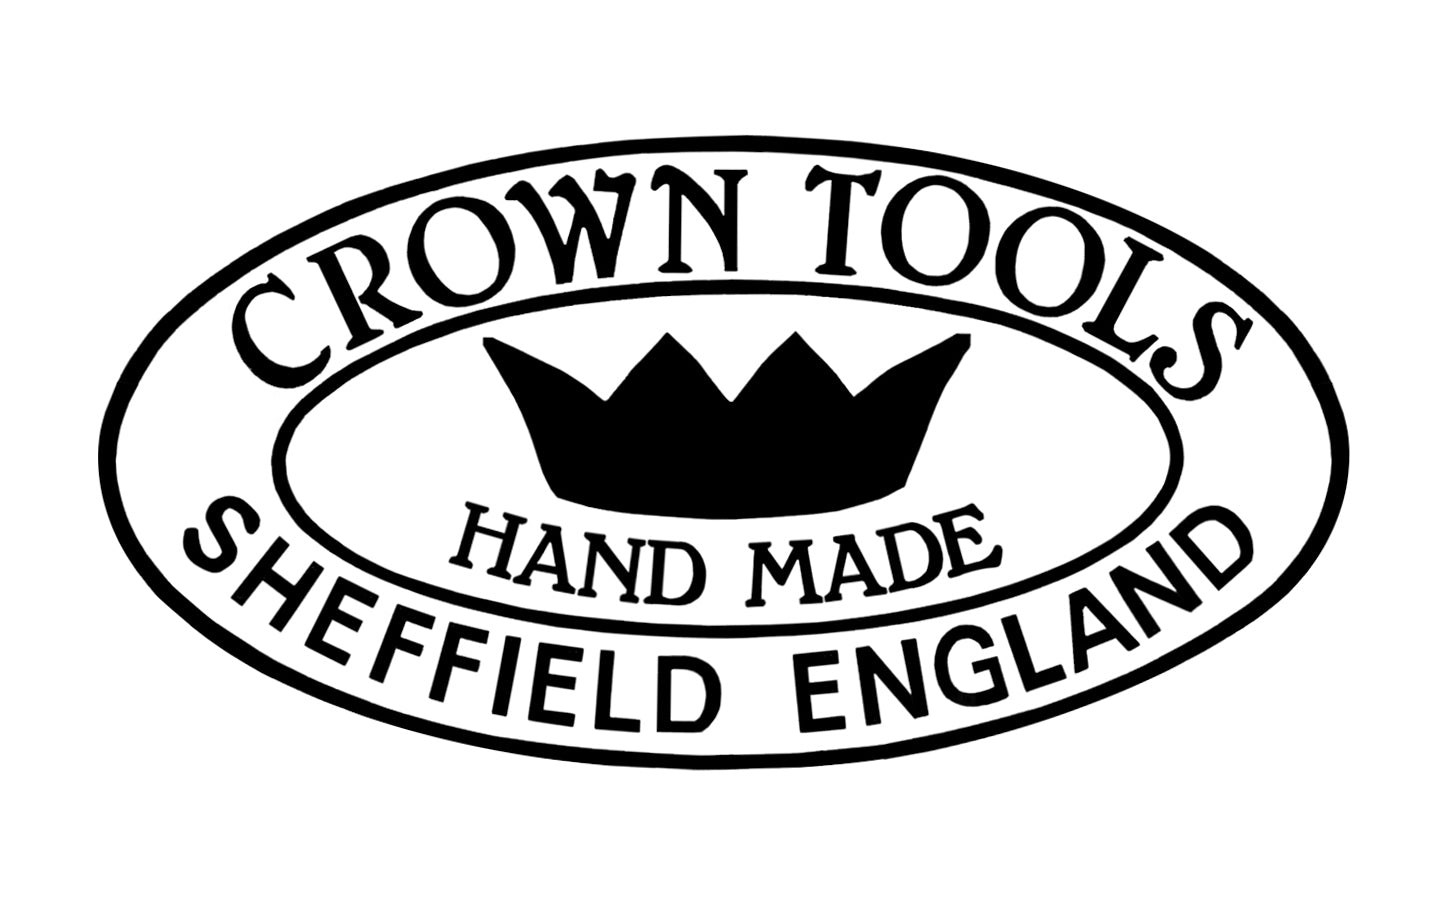 A high quality 4-1/2" Clipt Point Shoe Knife made by Crown Tools in Sheffield, England. The blade is made of carbon steel & is hardened & tempered. The handle is made of un-lacquered Beechwood. Made in Sheffield, England. Model No. 383. 